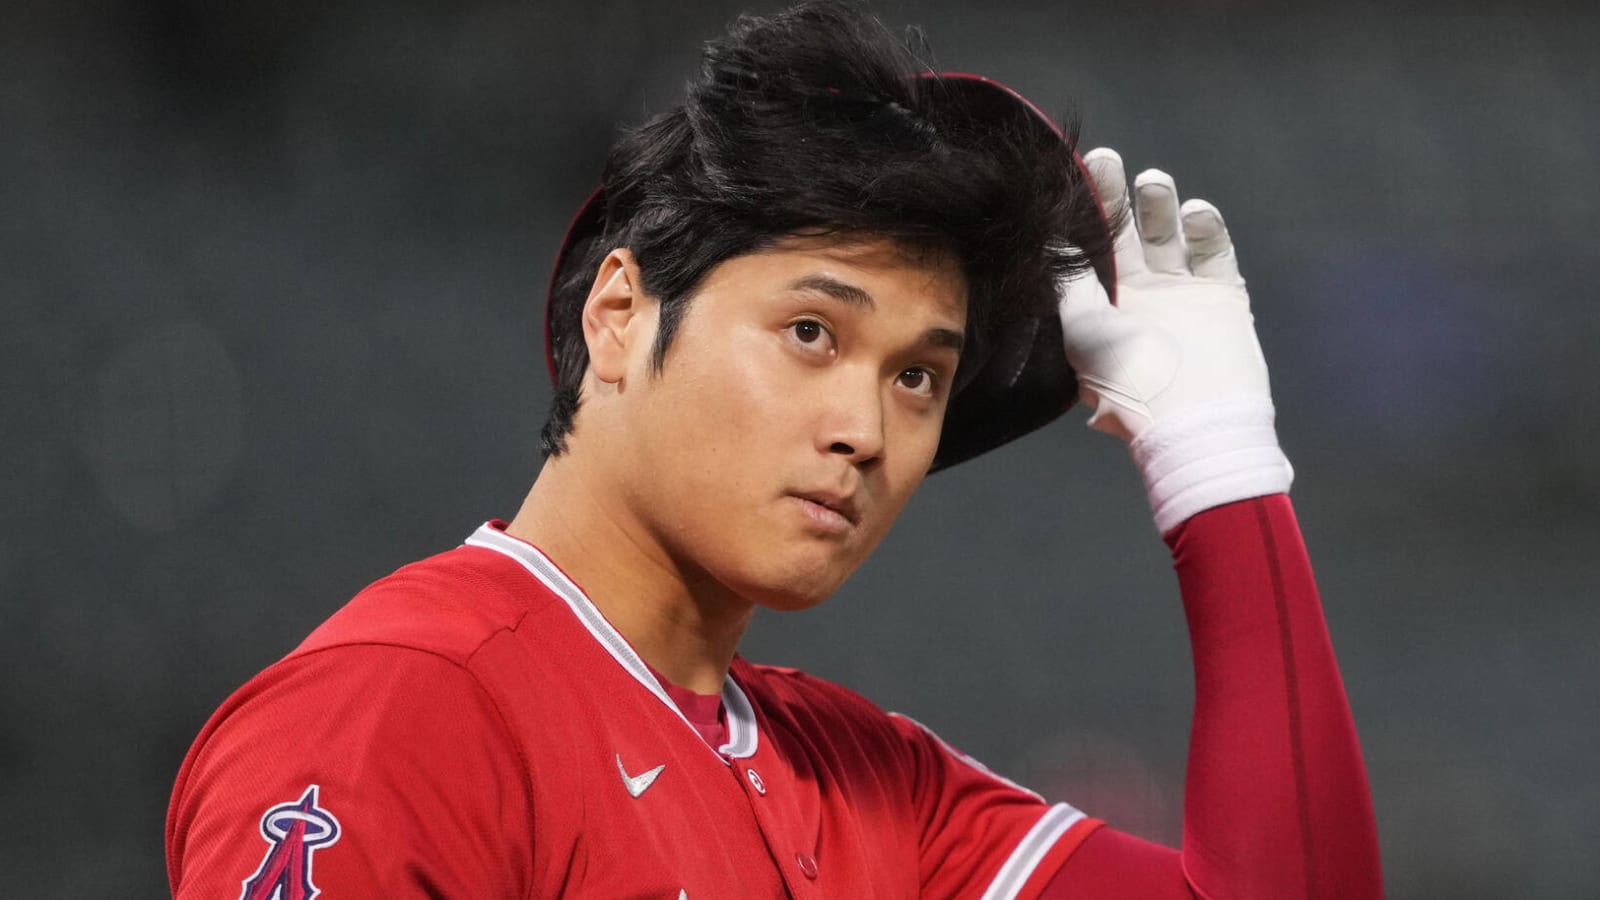 Shohei Ohtani's departure from the Angels seems inevitable